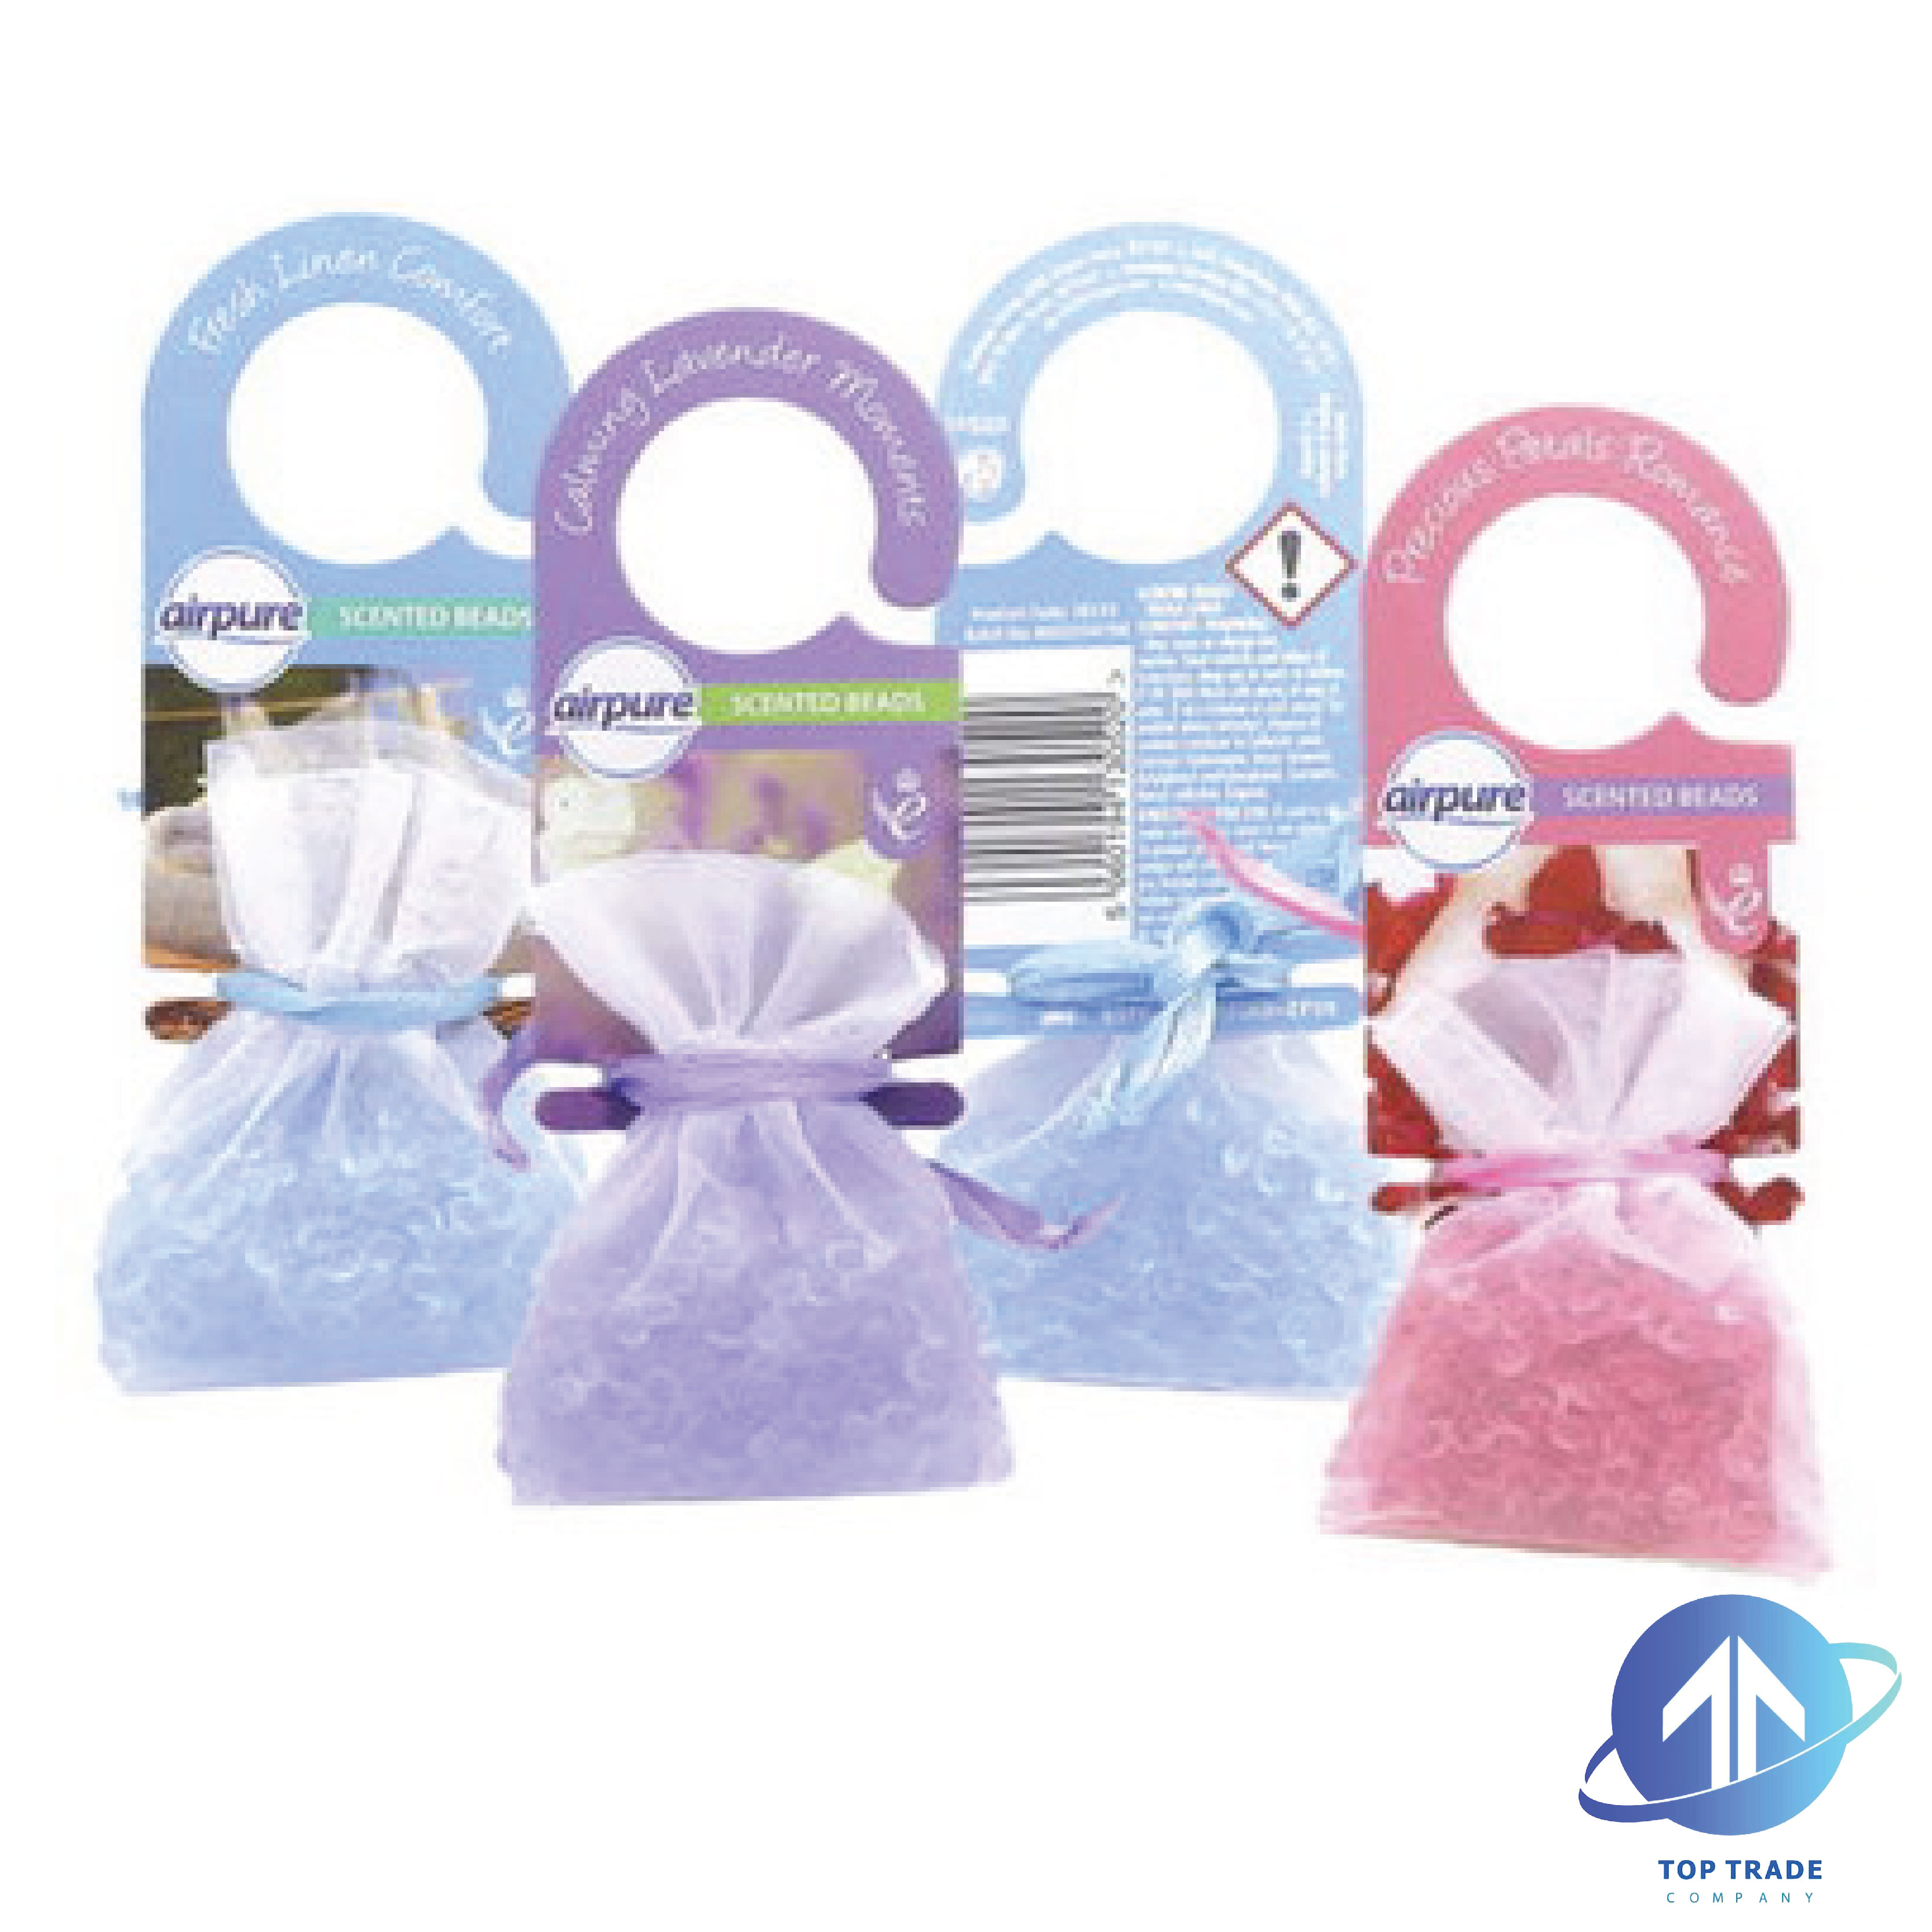 Airpure Home Collection scented beads - mix 3 fragrances